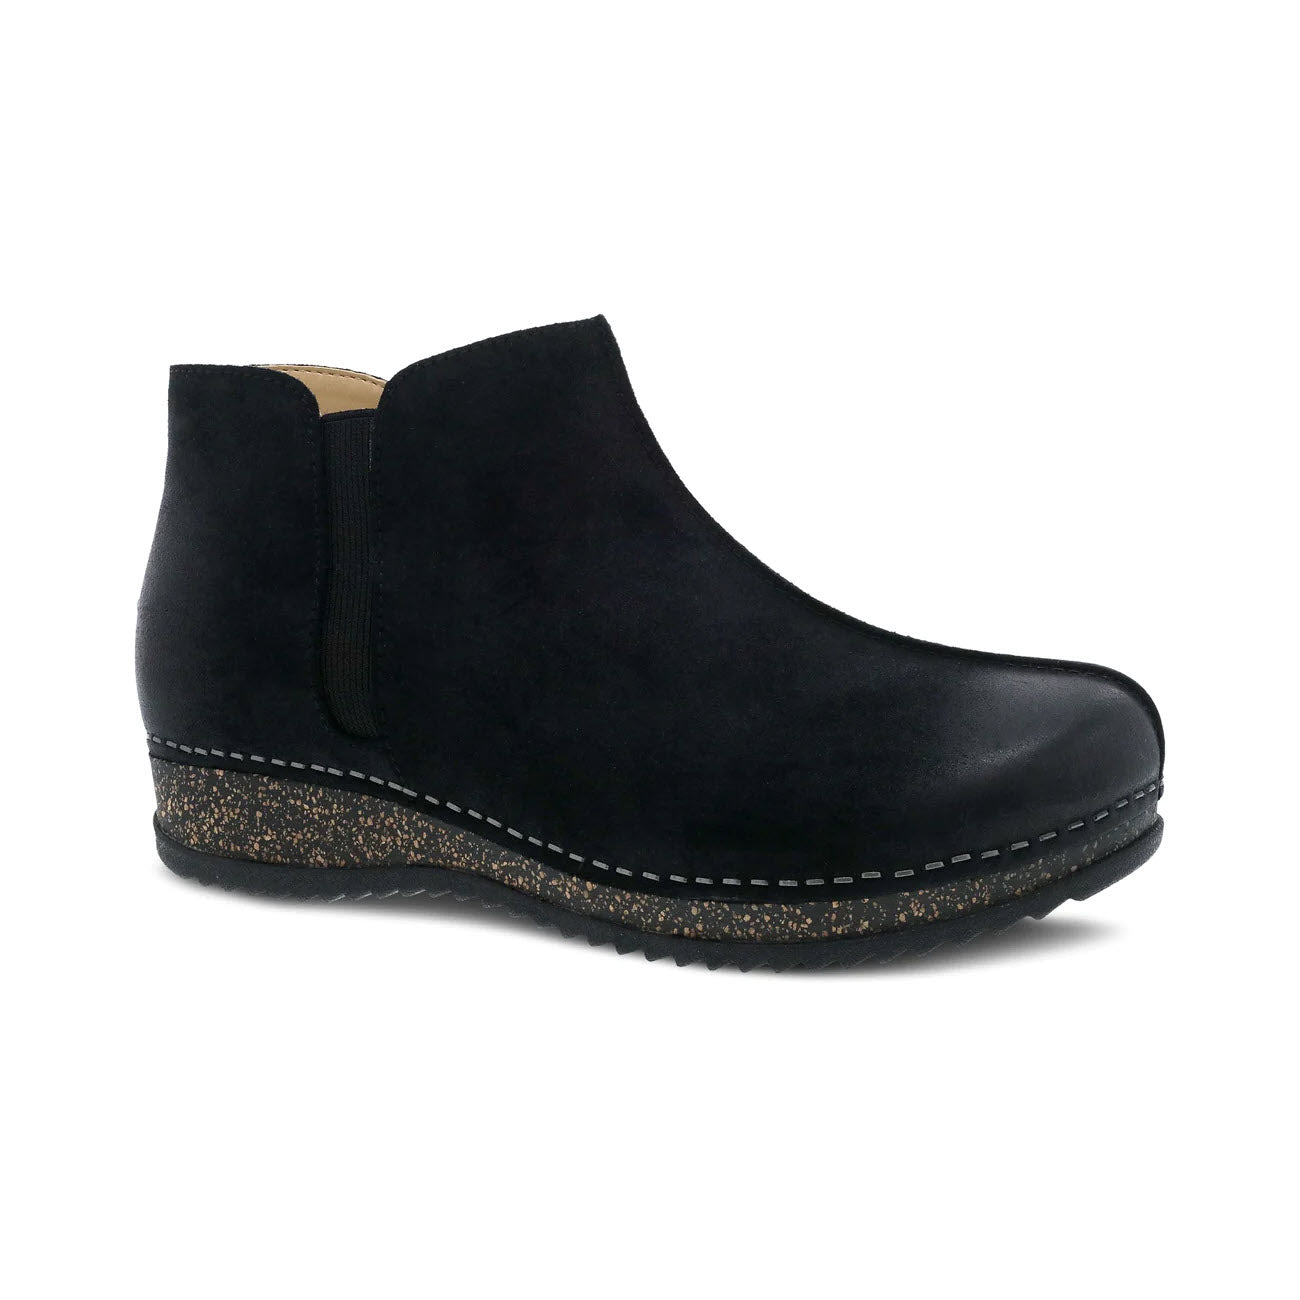 Dansko Makara bootie in black suede with a low wedge heel and speckled sole, isolated on a white background.